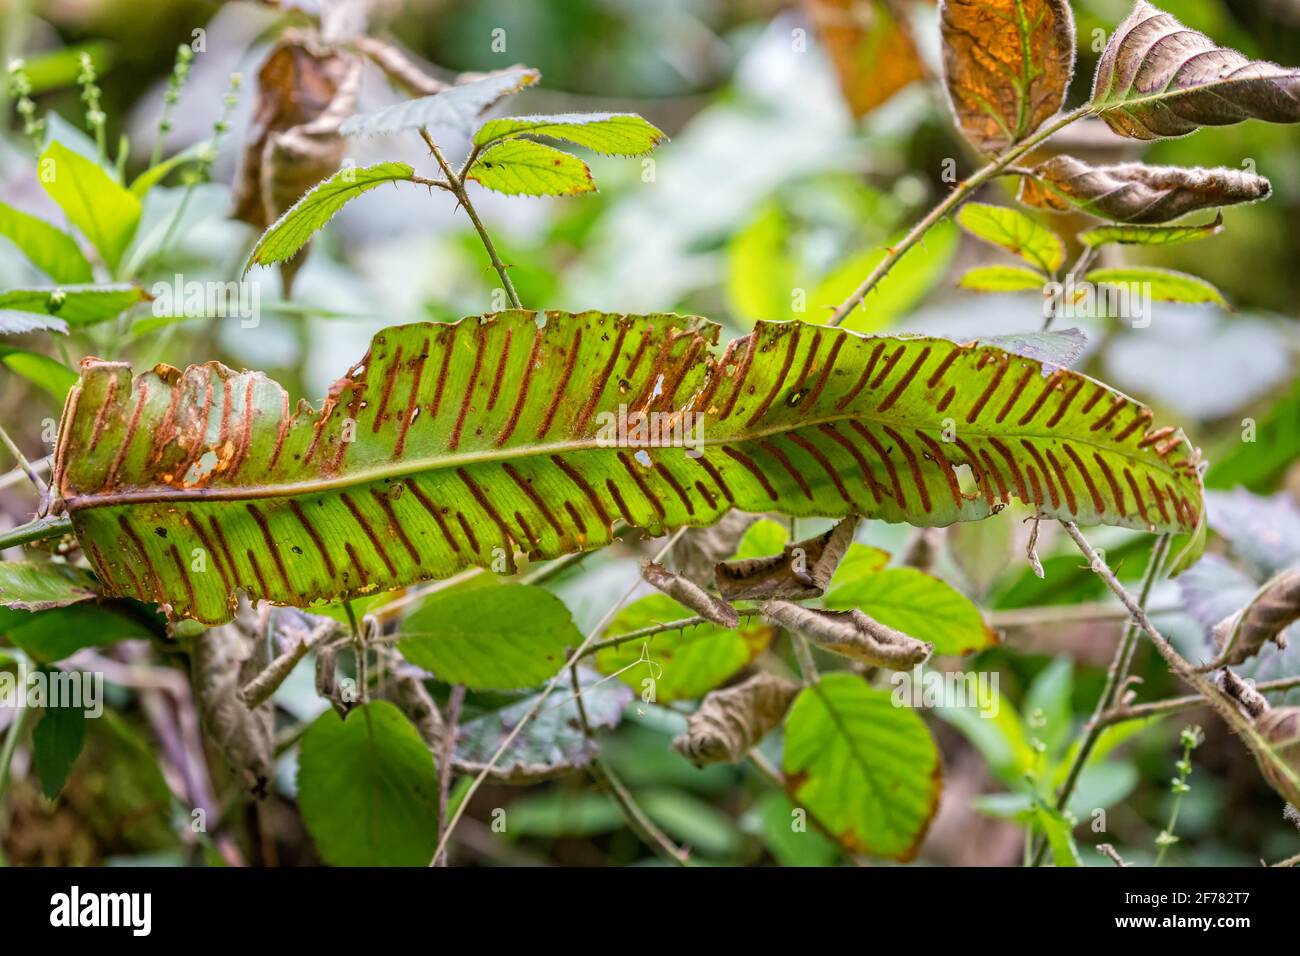 Close up of Hart's Tongue fern with orange striped spores on underside Stock Photo